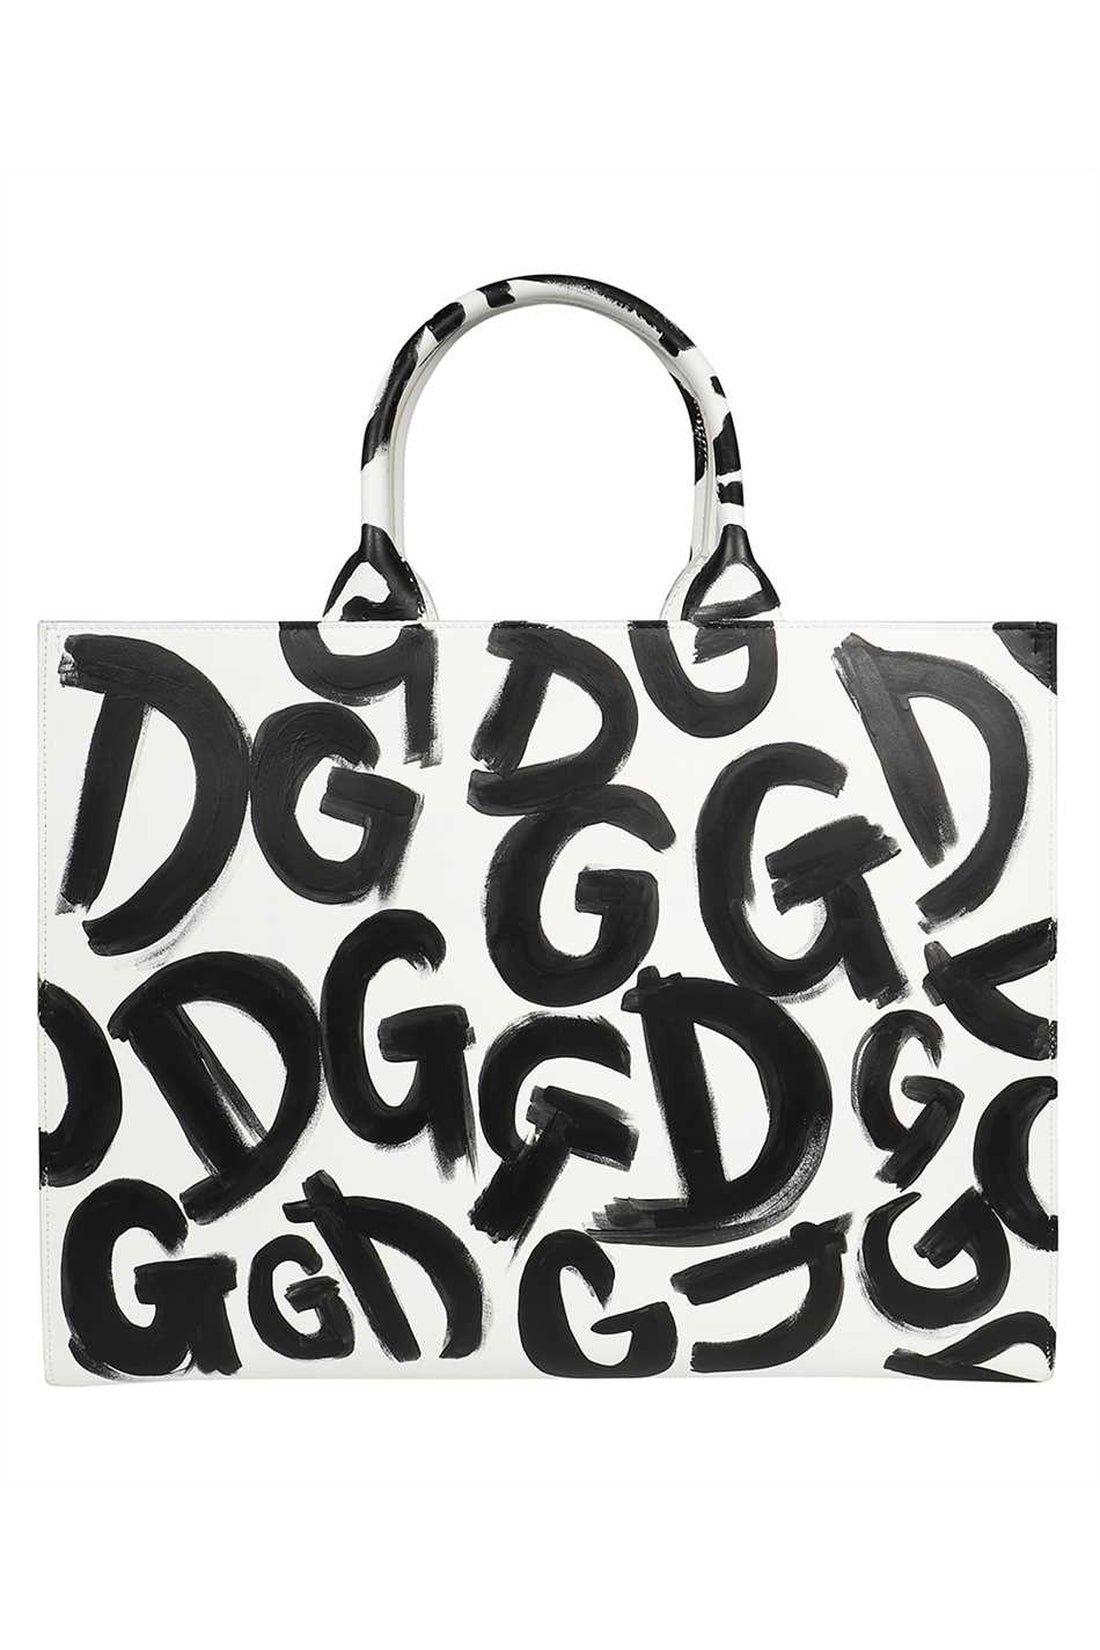 Dolce & Gabbana-OUTLET-SALE-DG Daily printed leather tote bag-ARCHIVIST